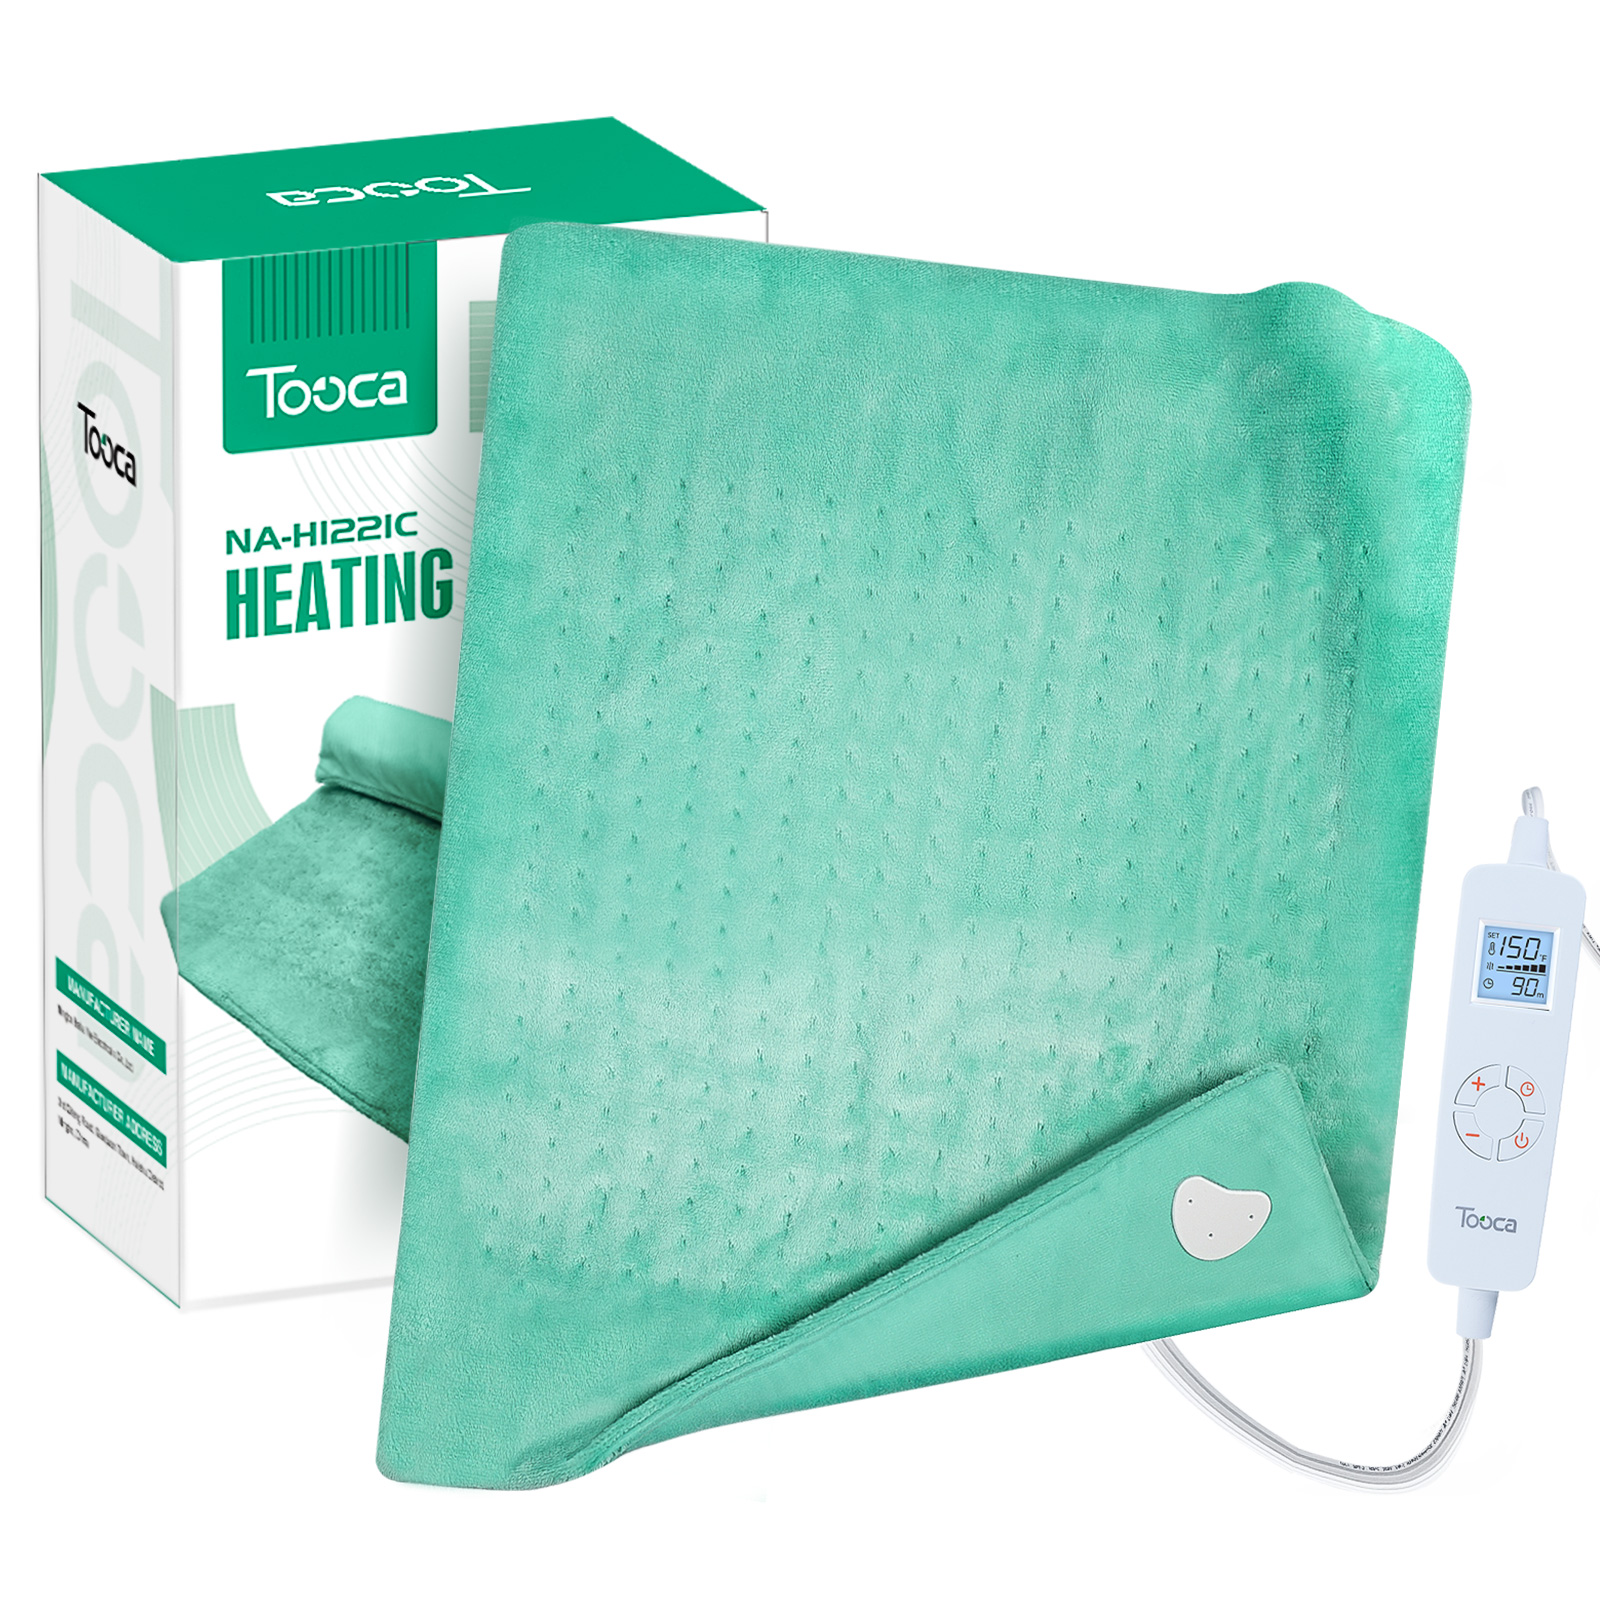 Tooca Electric Heating Blanket Flannel Warm Automatic Power-off Temperature Display Overheat Protection Washable Heated Blanket